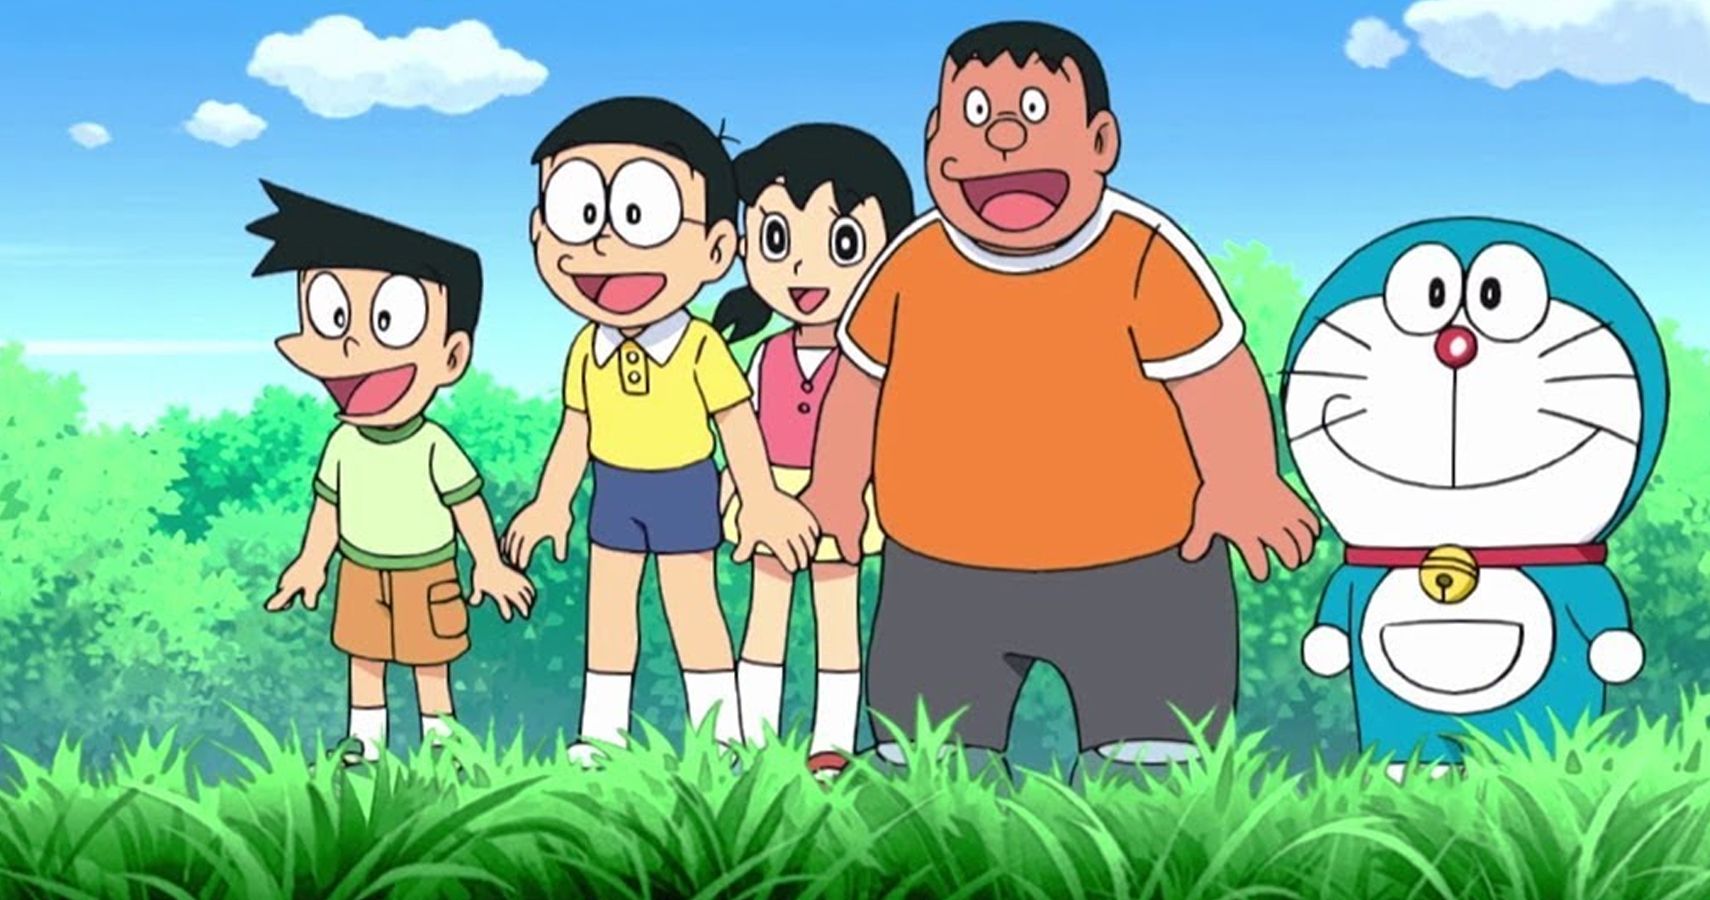 Doraemon, television Channel, television Show, YouTube, television,  happiness, anime, character, artwork, smile | Anyrgb